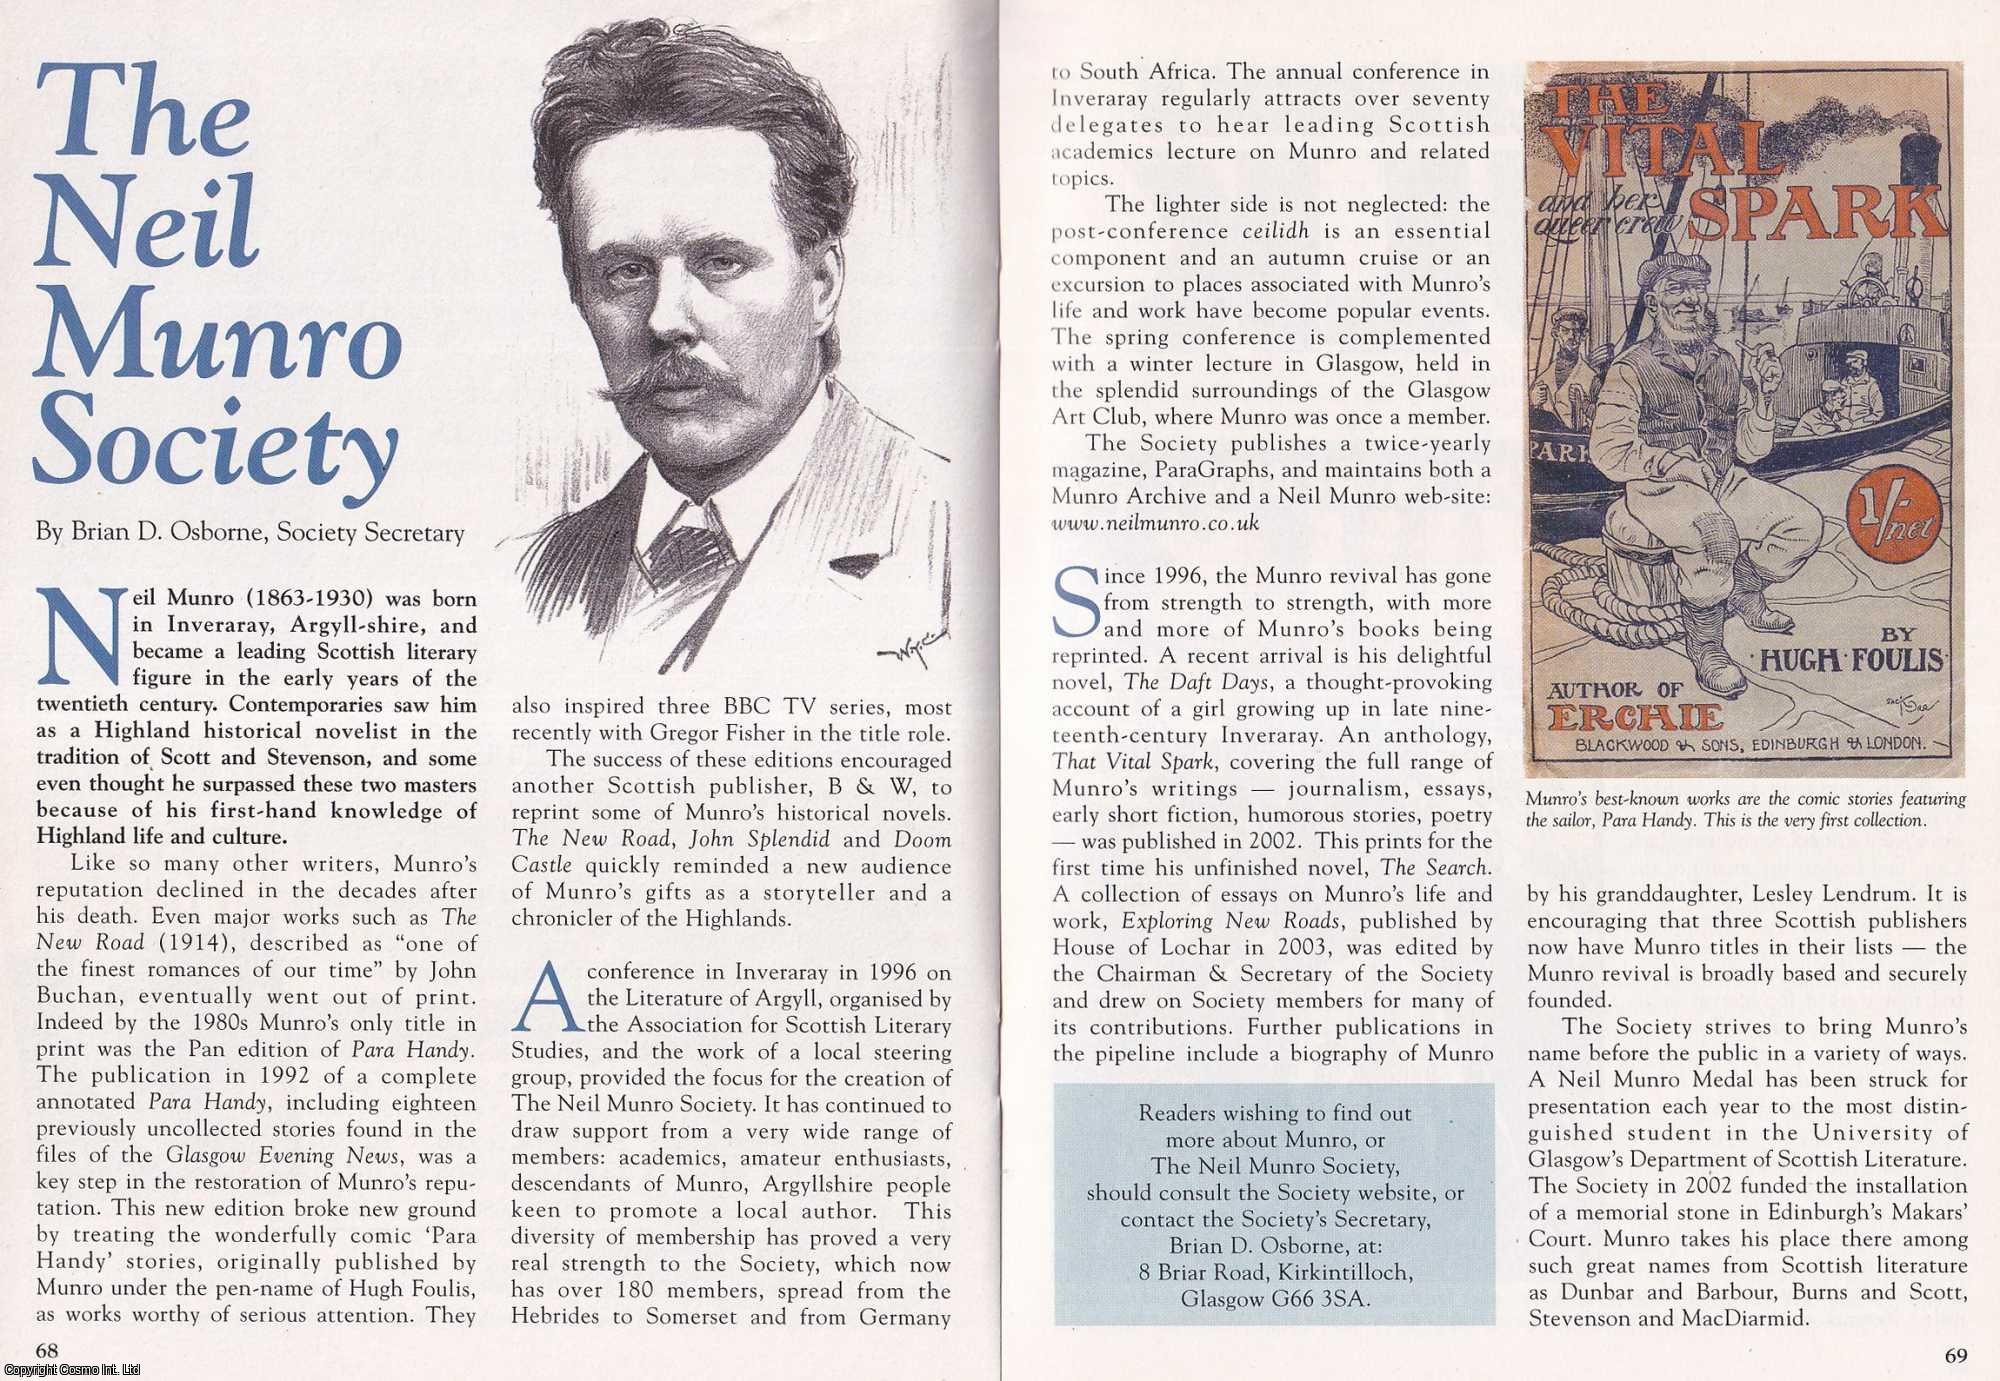 Brian D. Osborne - The Neil Munro Society. This is an original article separated from an issue of The Book & Magazine Collector publication.